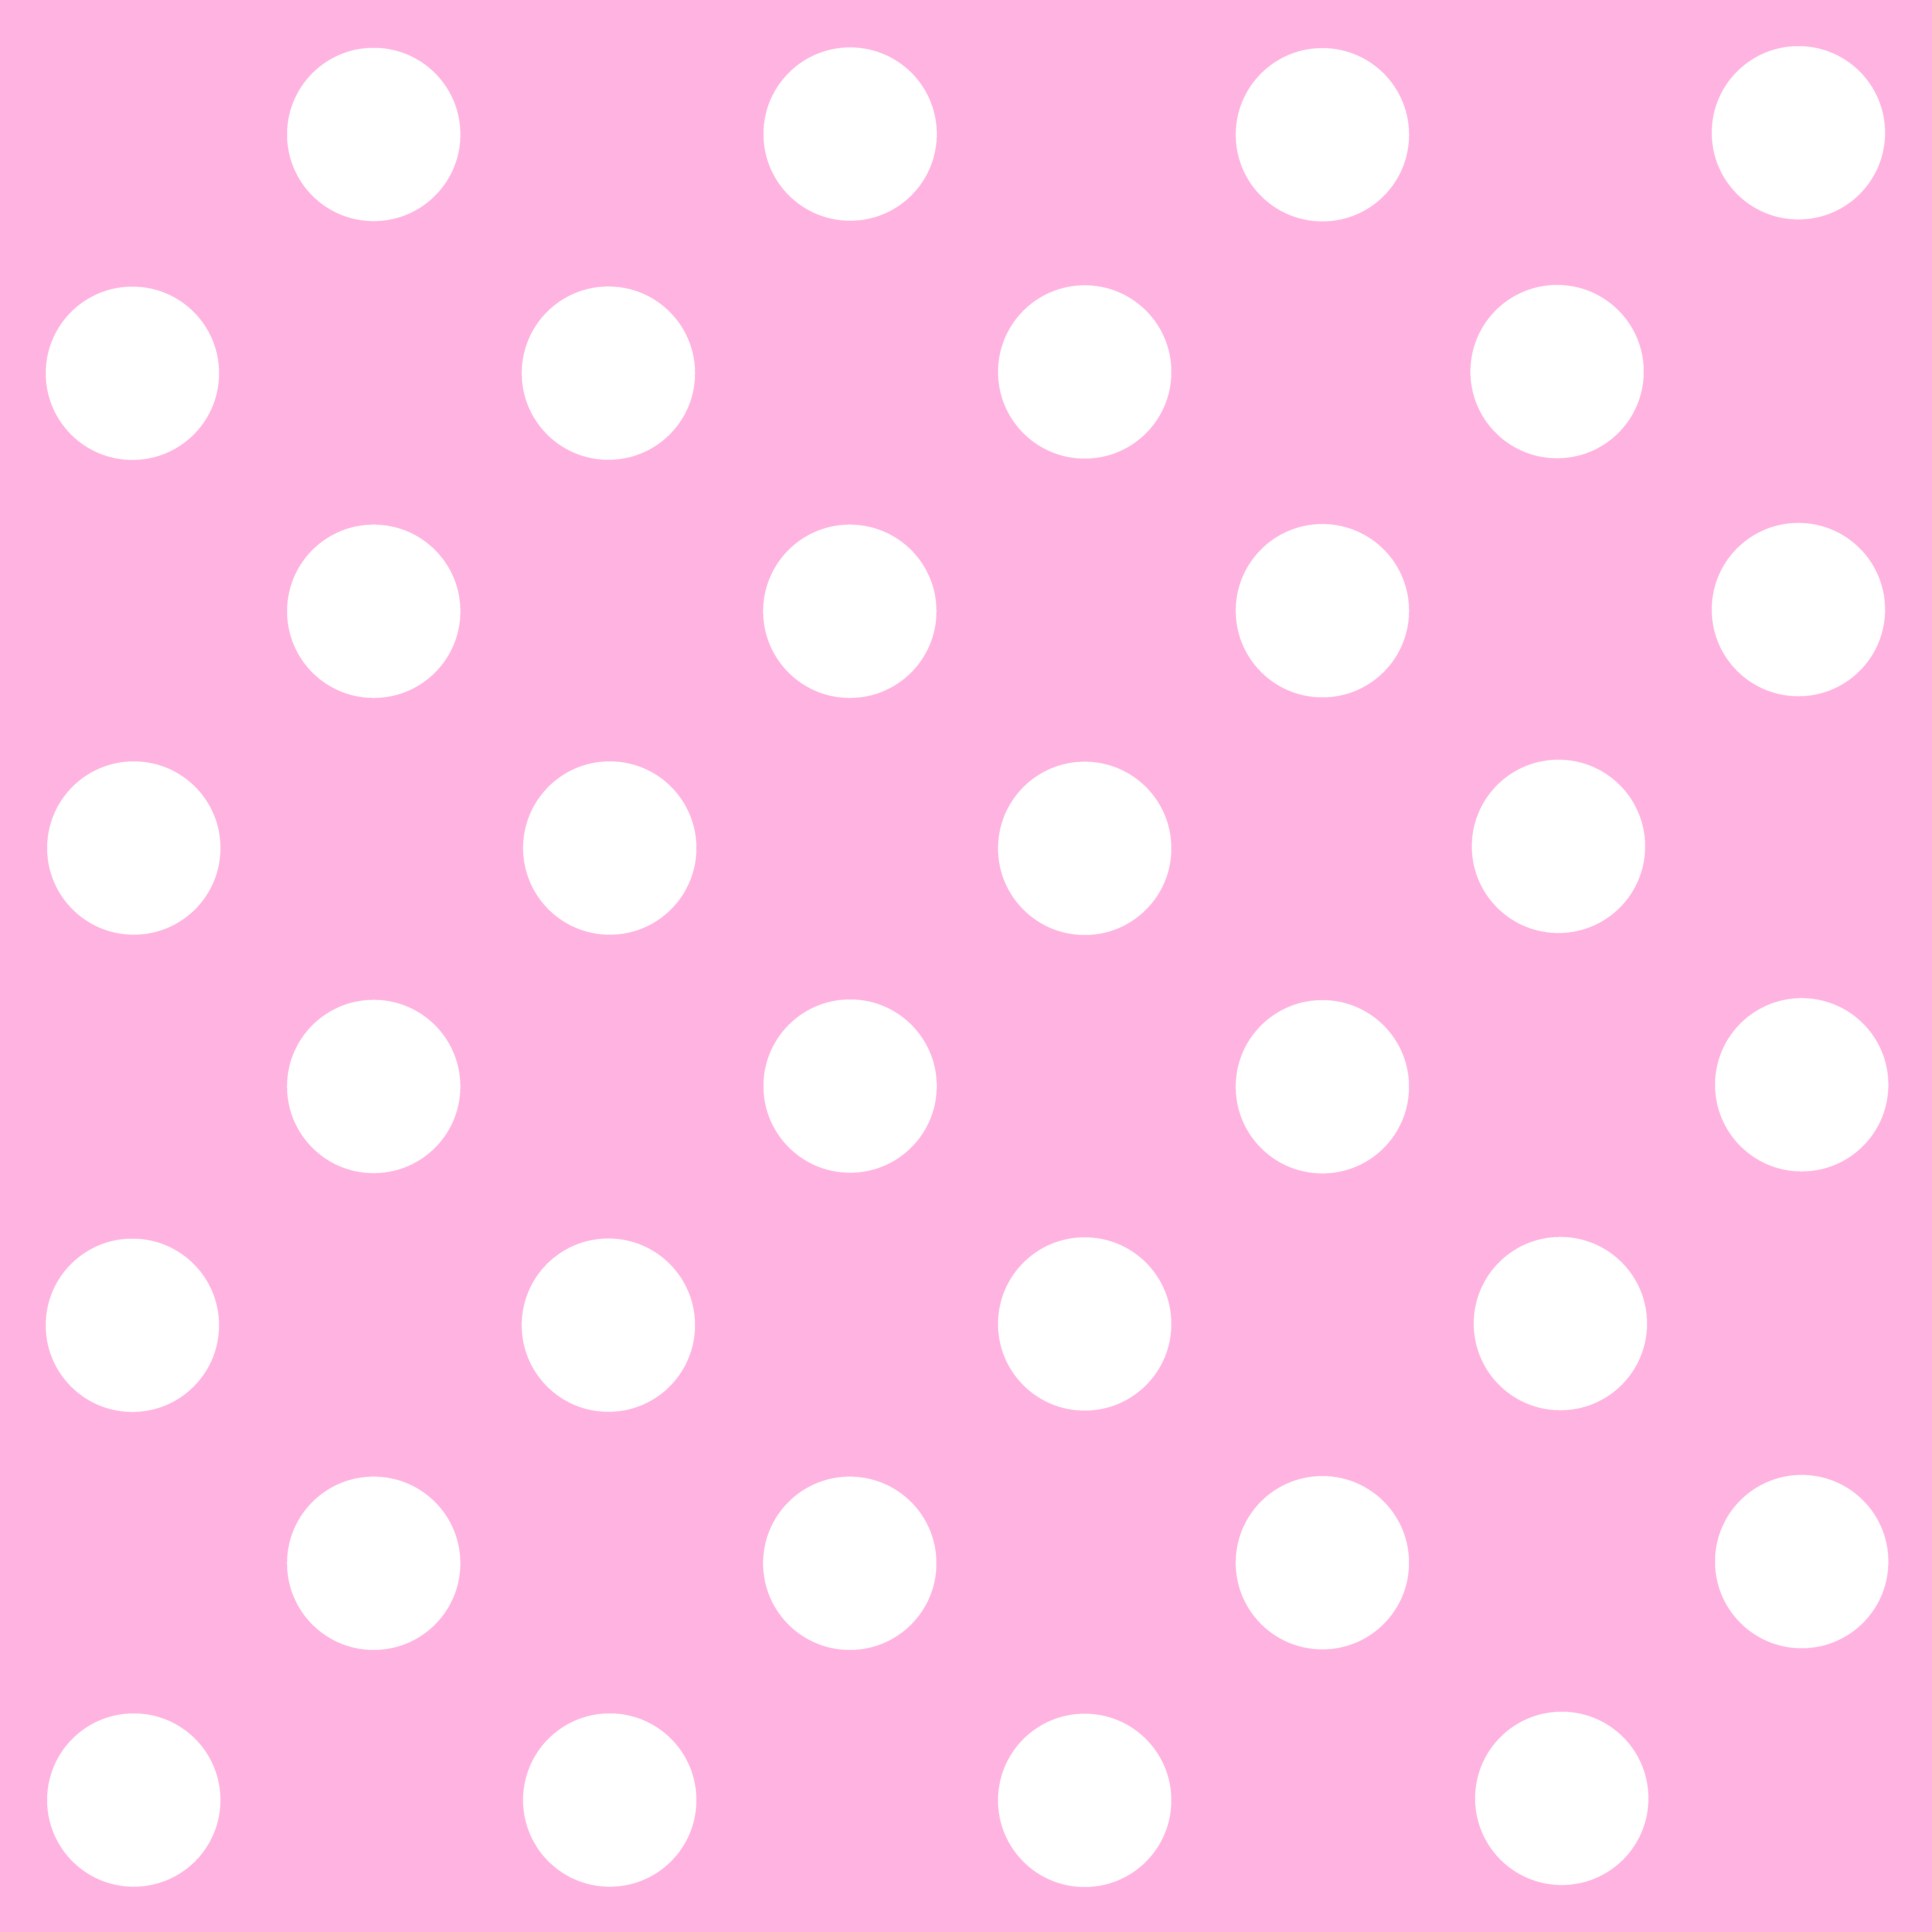 Pink and White Polka Dots Pattern - Free Clip Art